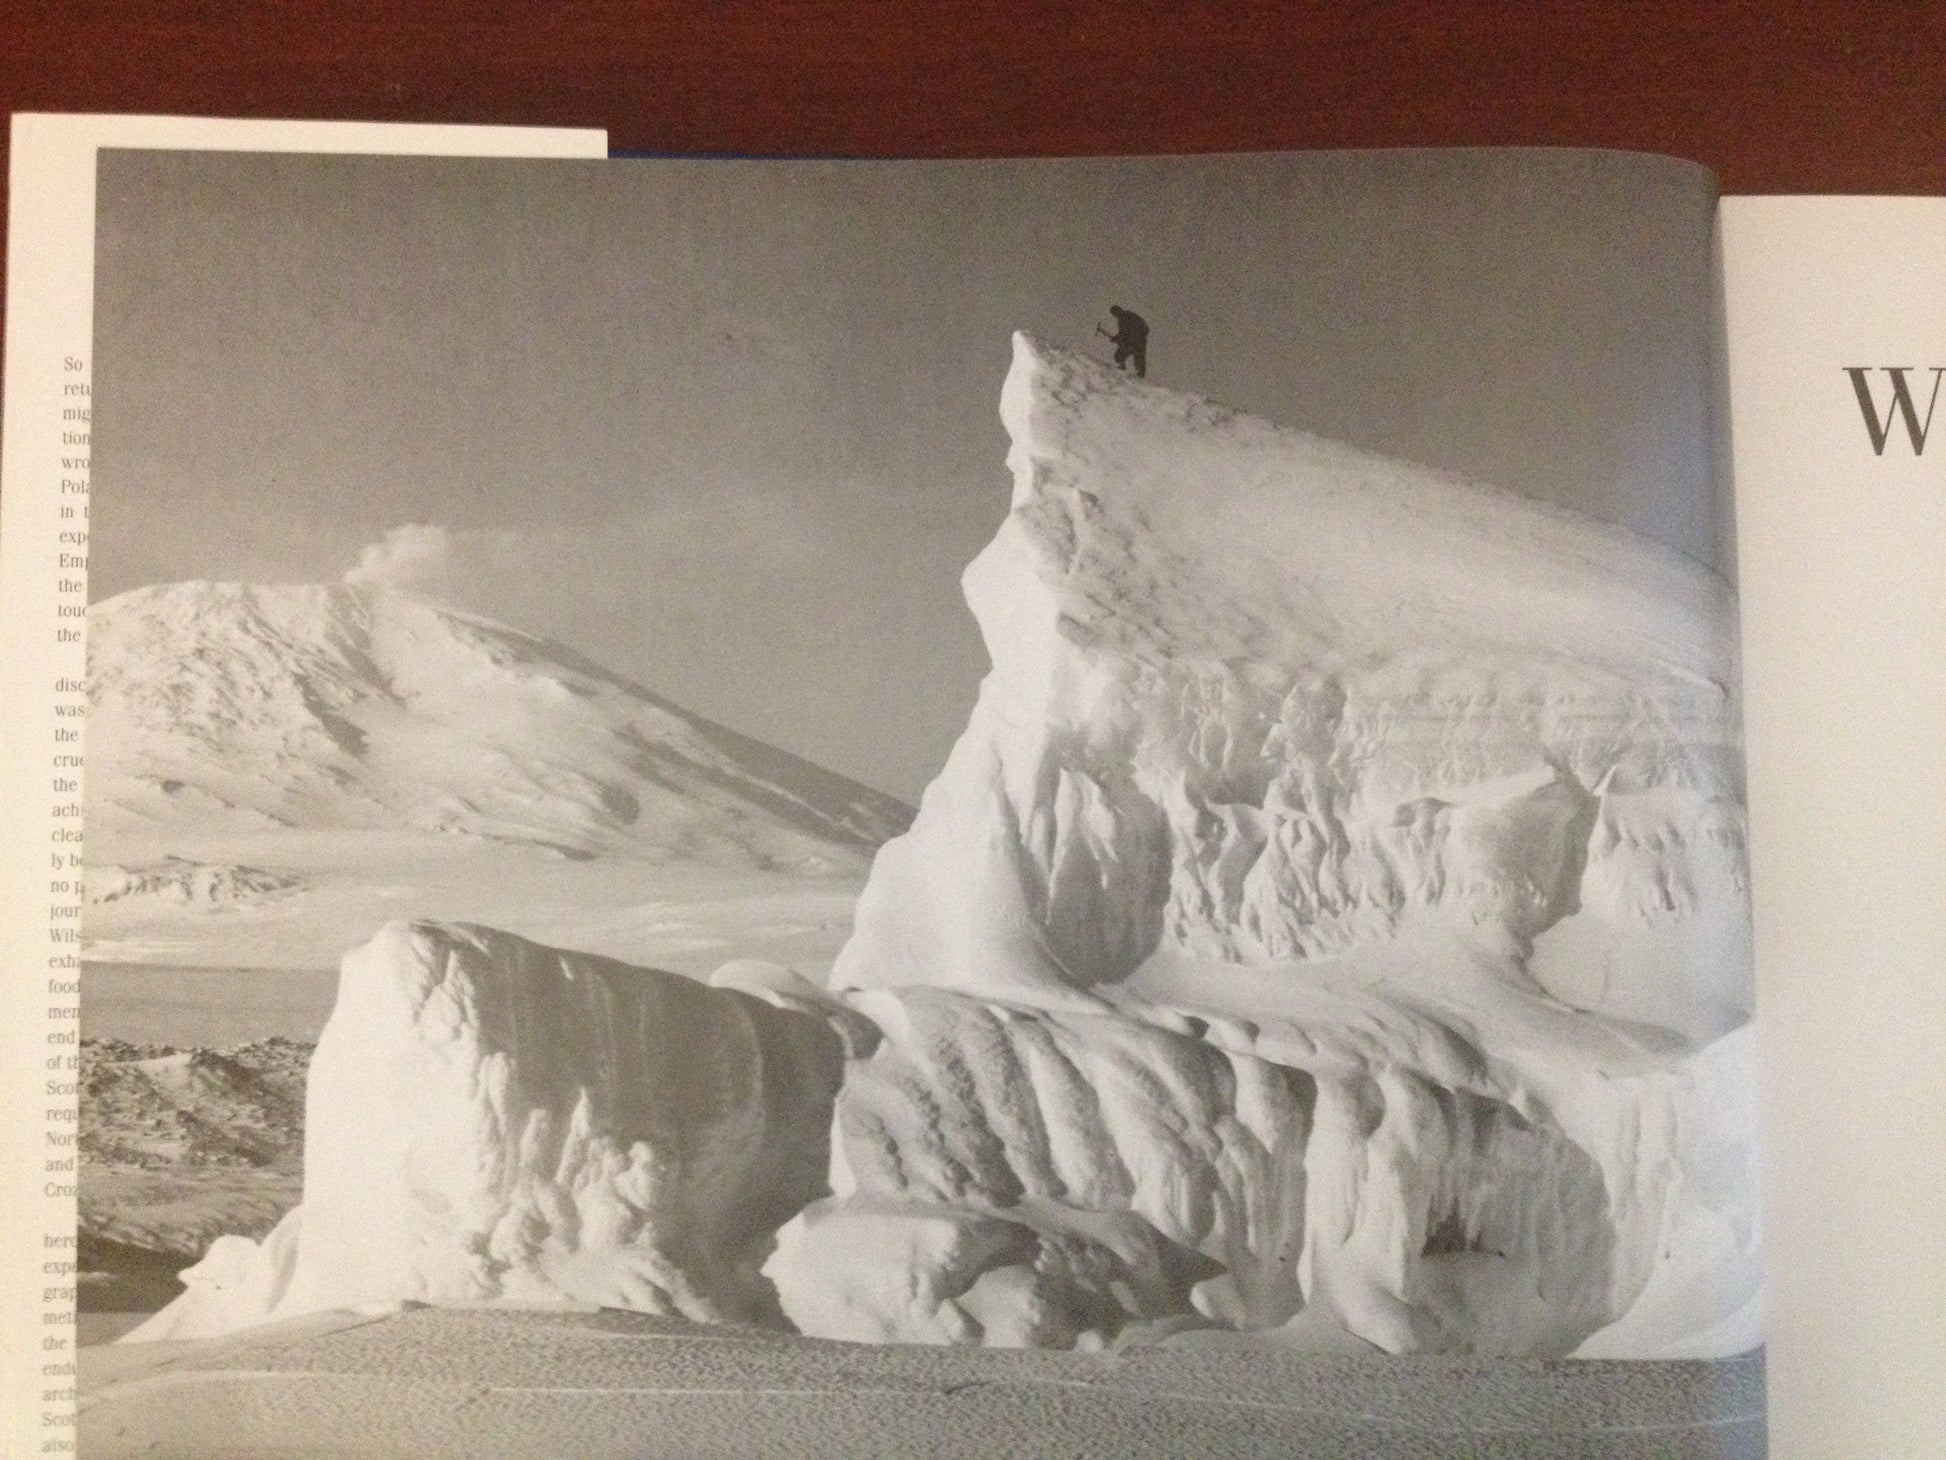 WITH SCOTT TO THE POLICE THE TERRA NOVA EXPEDITION 1910-1913, THE PHOTOGRAPHS OF HERBERT PONTING BooksCardsNBikes